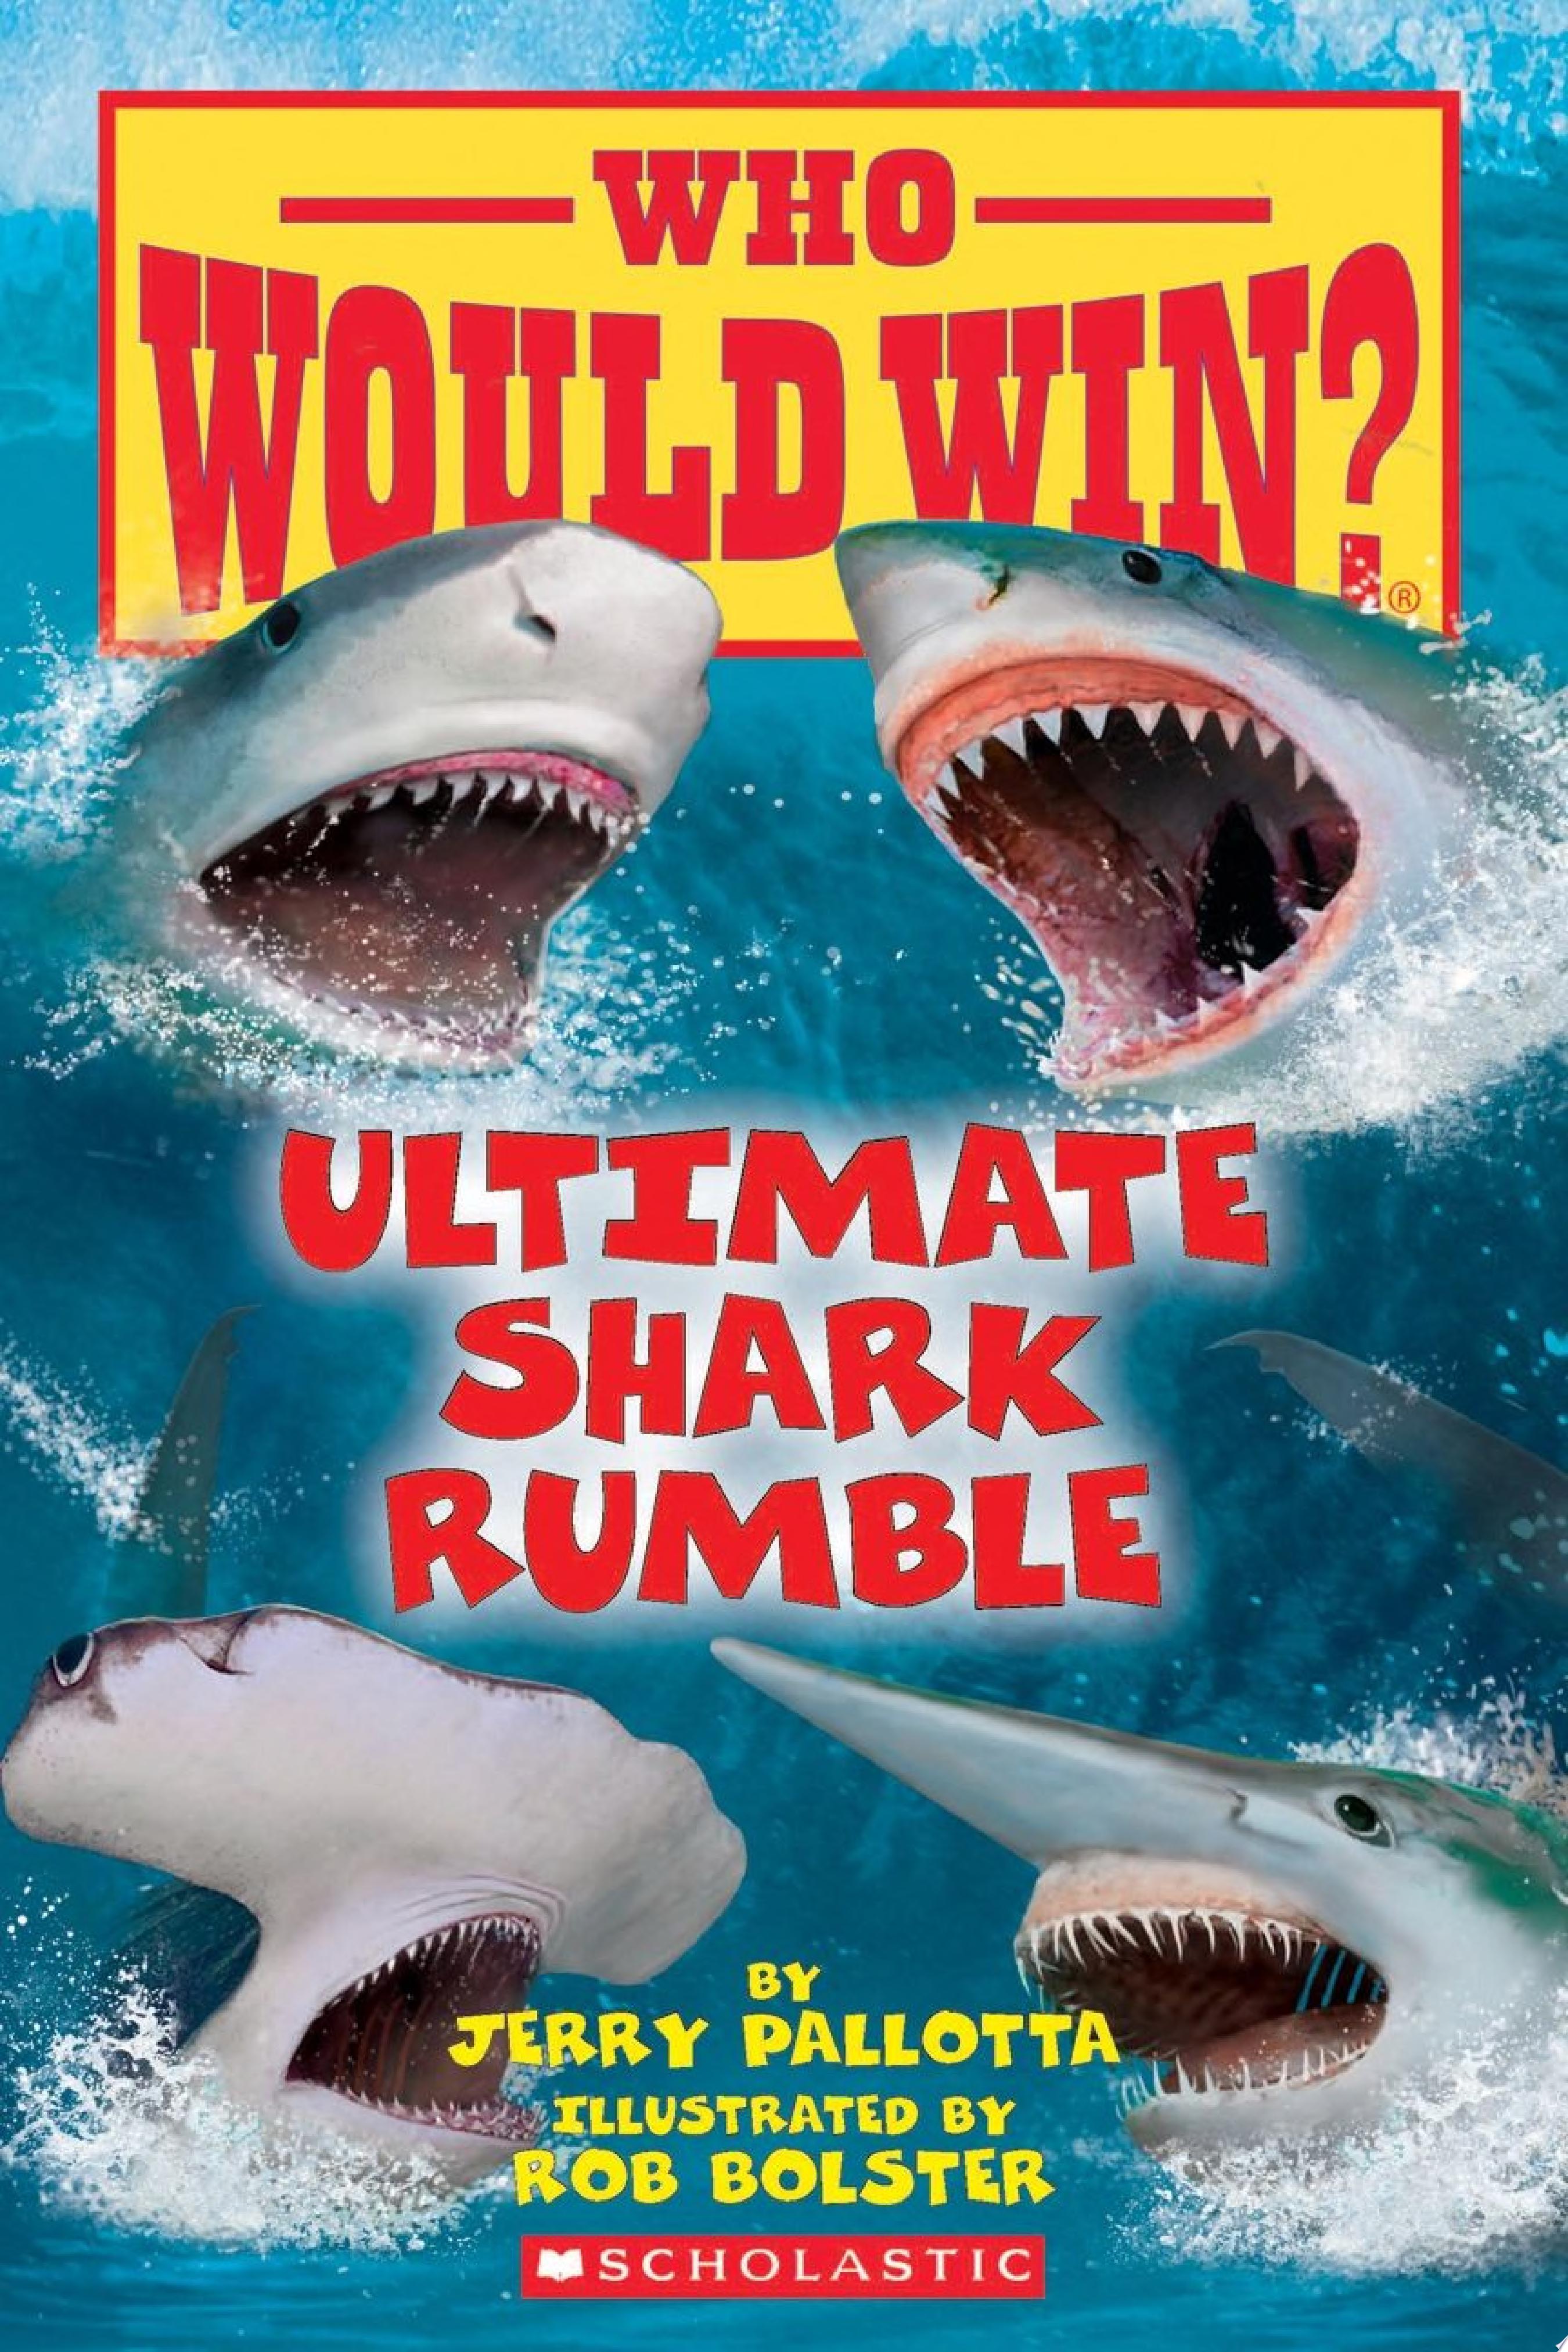 Image for "Ultimate Shark Rumble (Who Would Win?)"